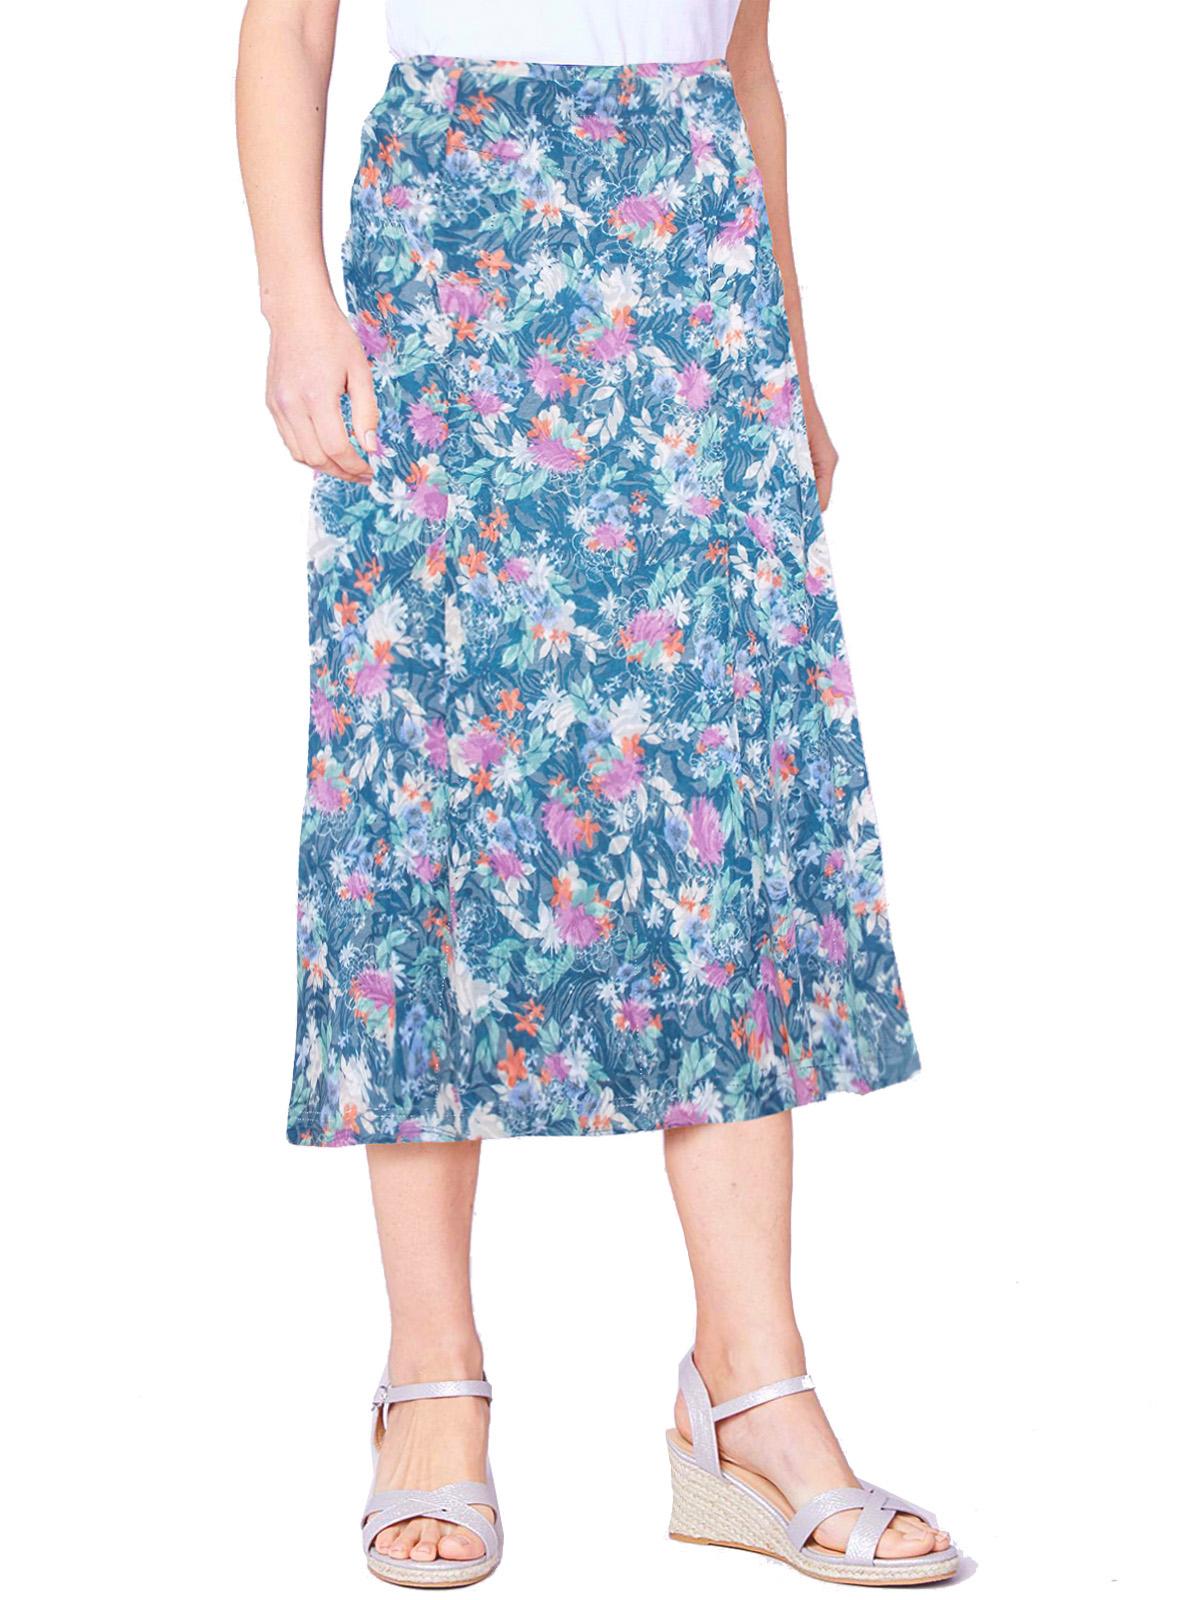 Cotton Traders BLUE Printed Burn Out Midi Skirt - Size 10 to 26